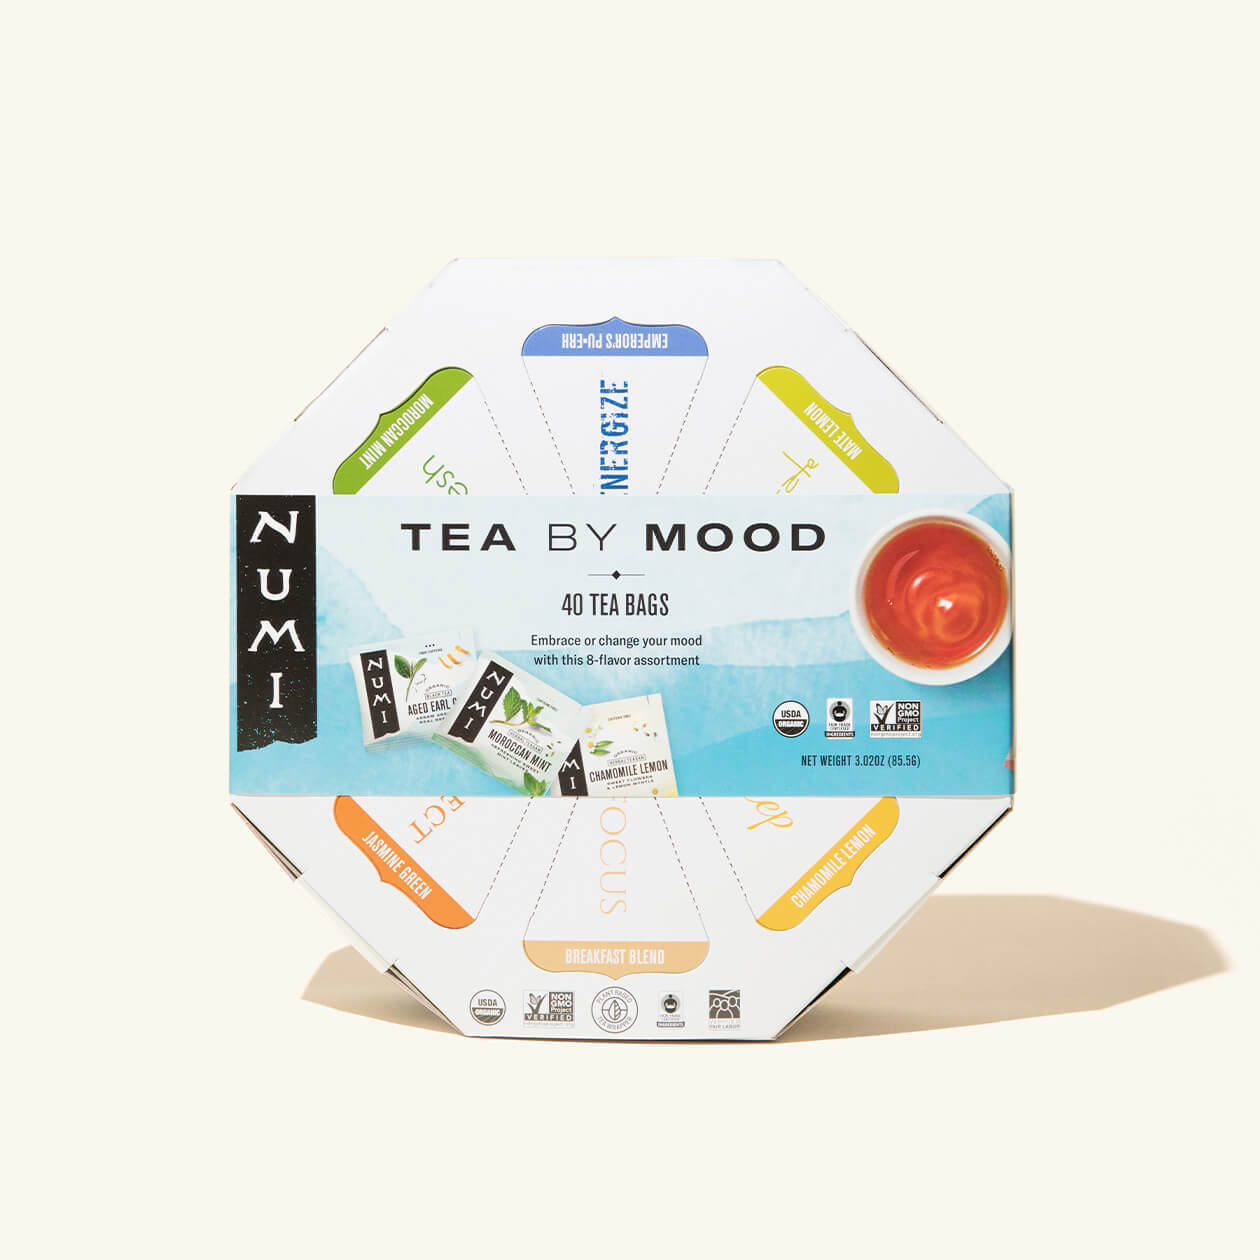 A Numi Tea By Mood gift on a cream background